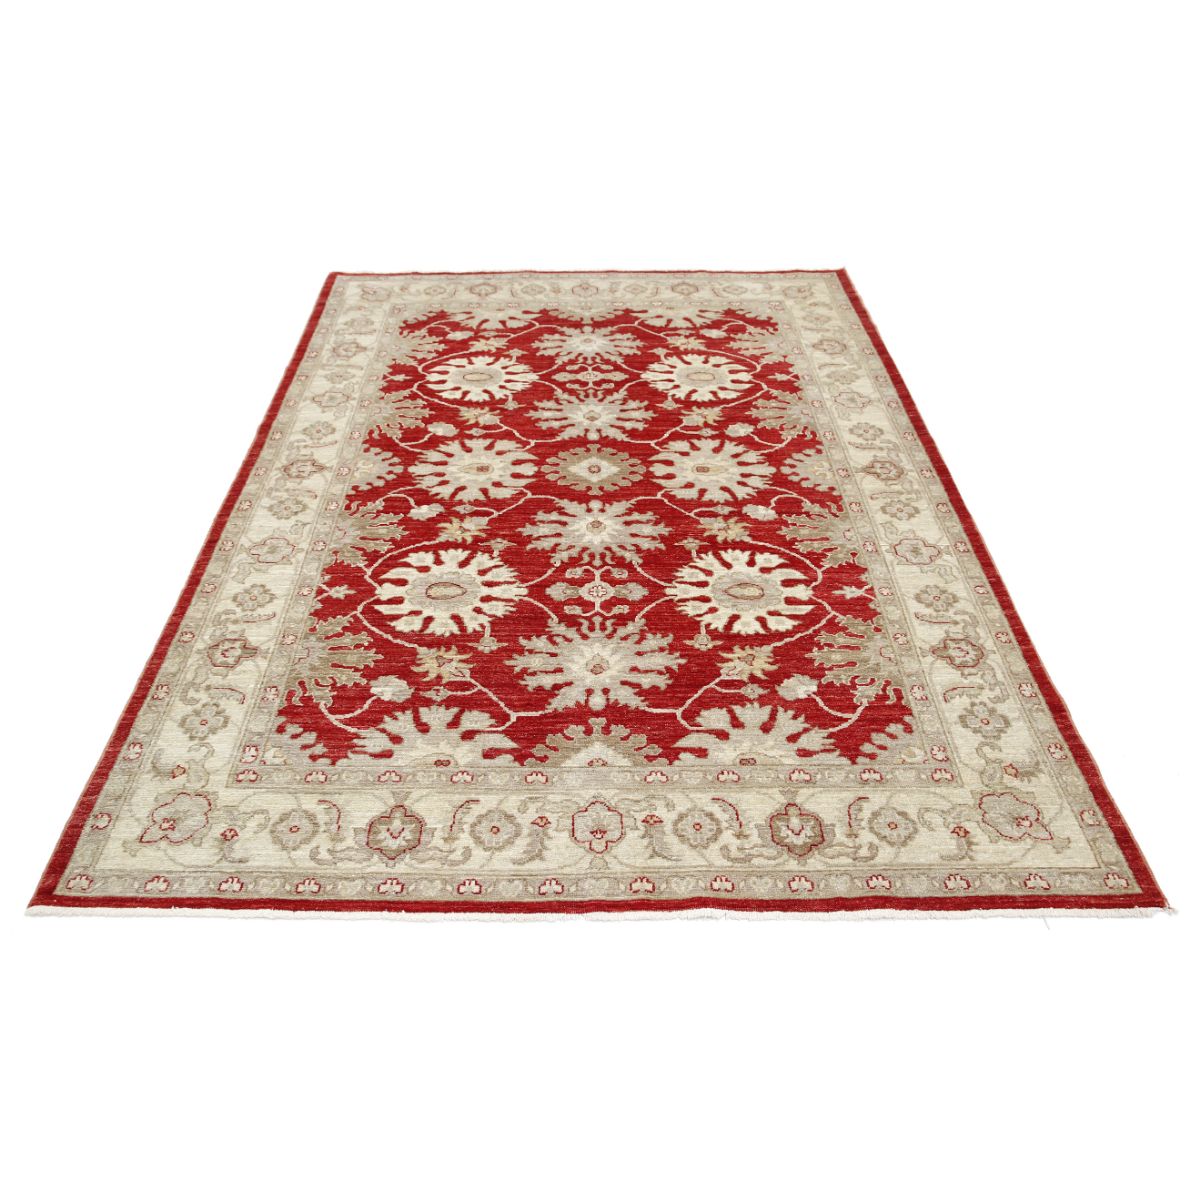 Ziegler 5'8" X 7'8" Wool Hand-Knotted Rug